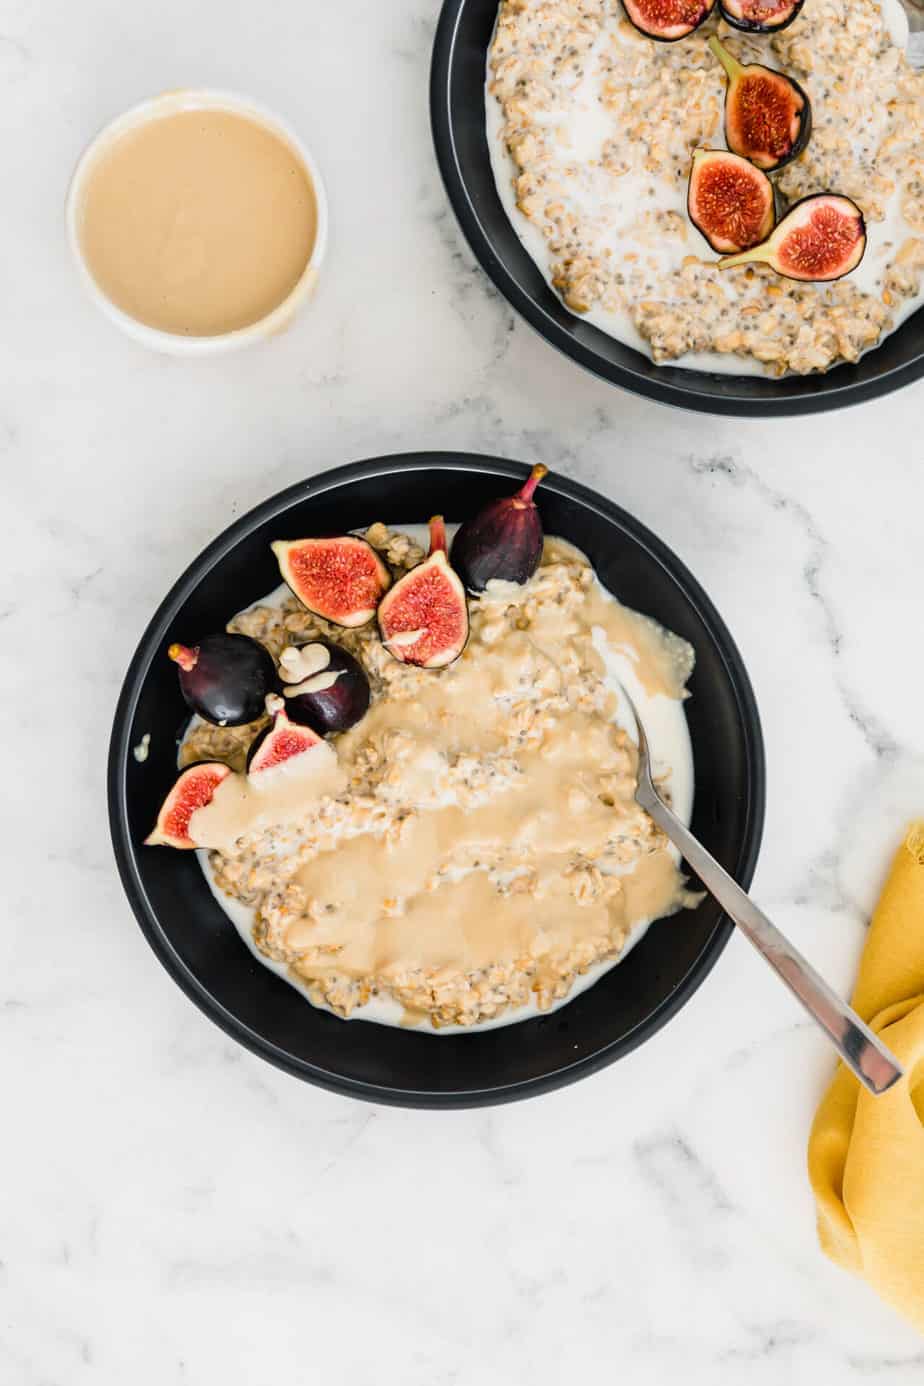 A bowl of overnight oats with tahini and fresh figs.